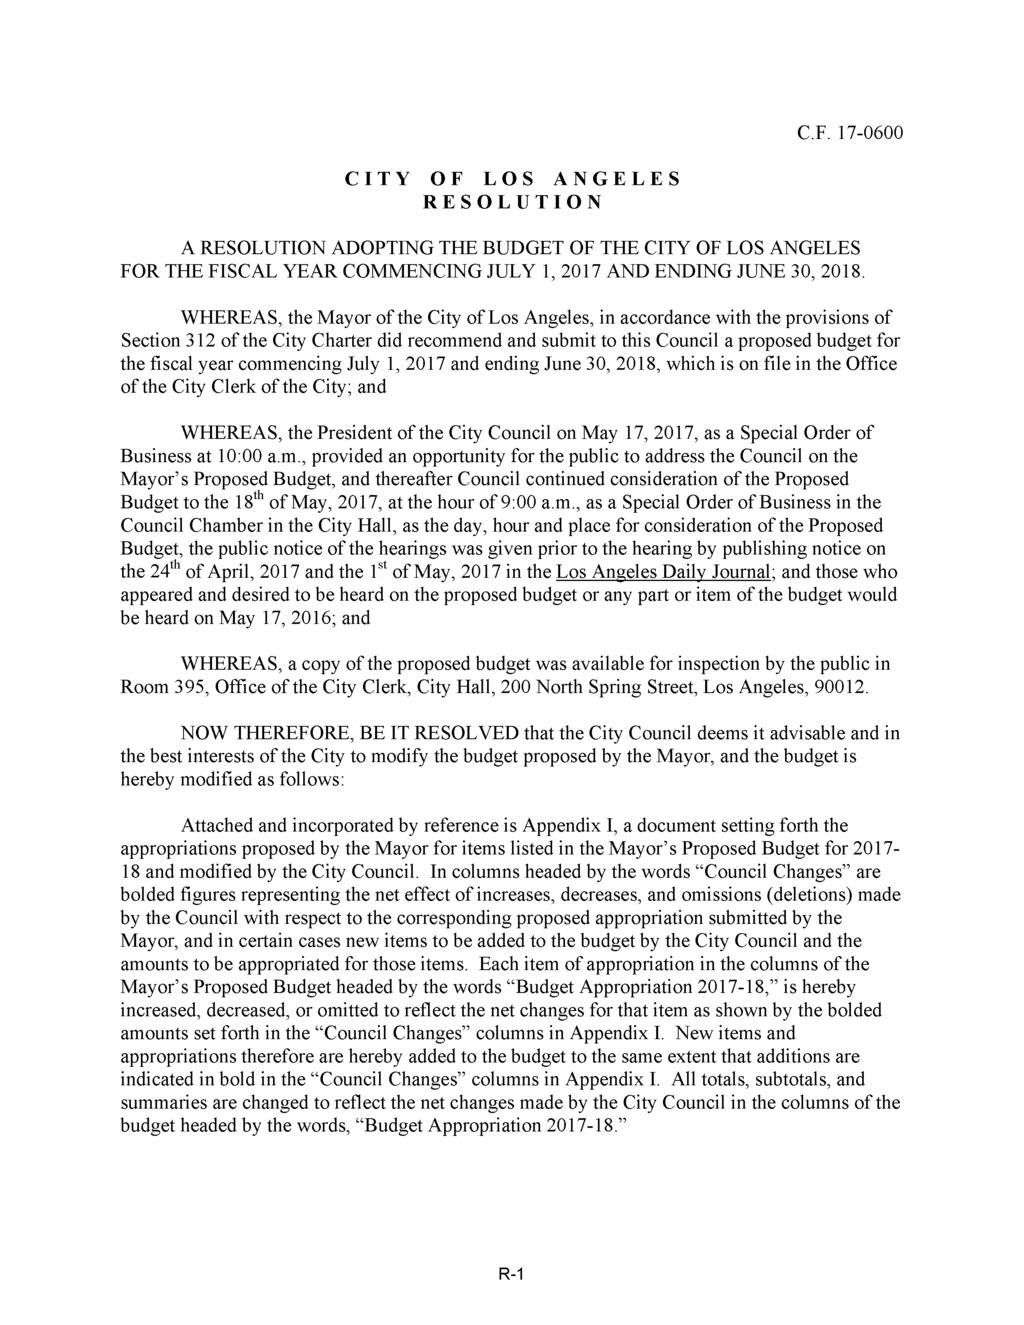 C.F.17-0600 C I T Y O F L O S A N G E L E S R E S O L U T I O N A RESOLUTION ADOPTING THE BUDGET OF THE CITY OF LOS ANGELES FOR THE FISCAL YEAR COMMENCING JULY 1, 2017 AND ENDING JUNE 30, 2018.